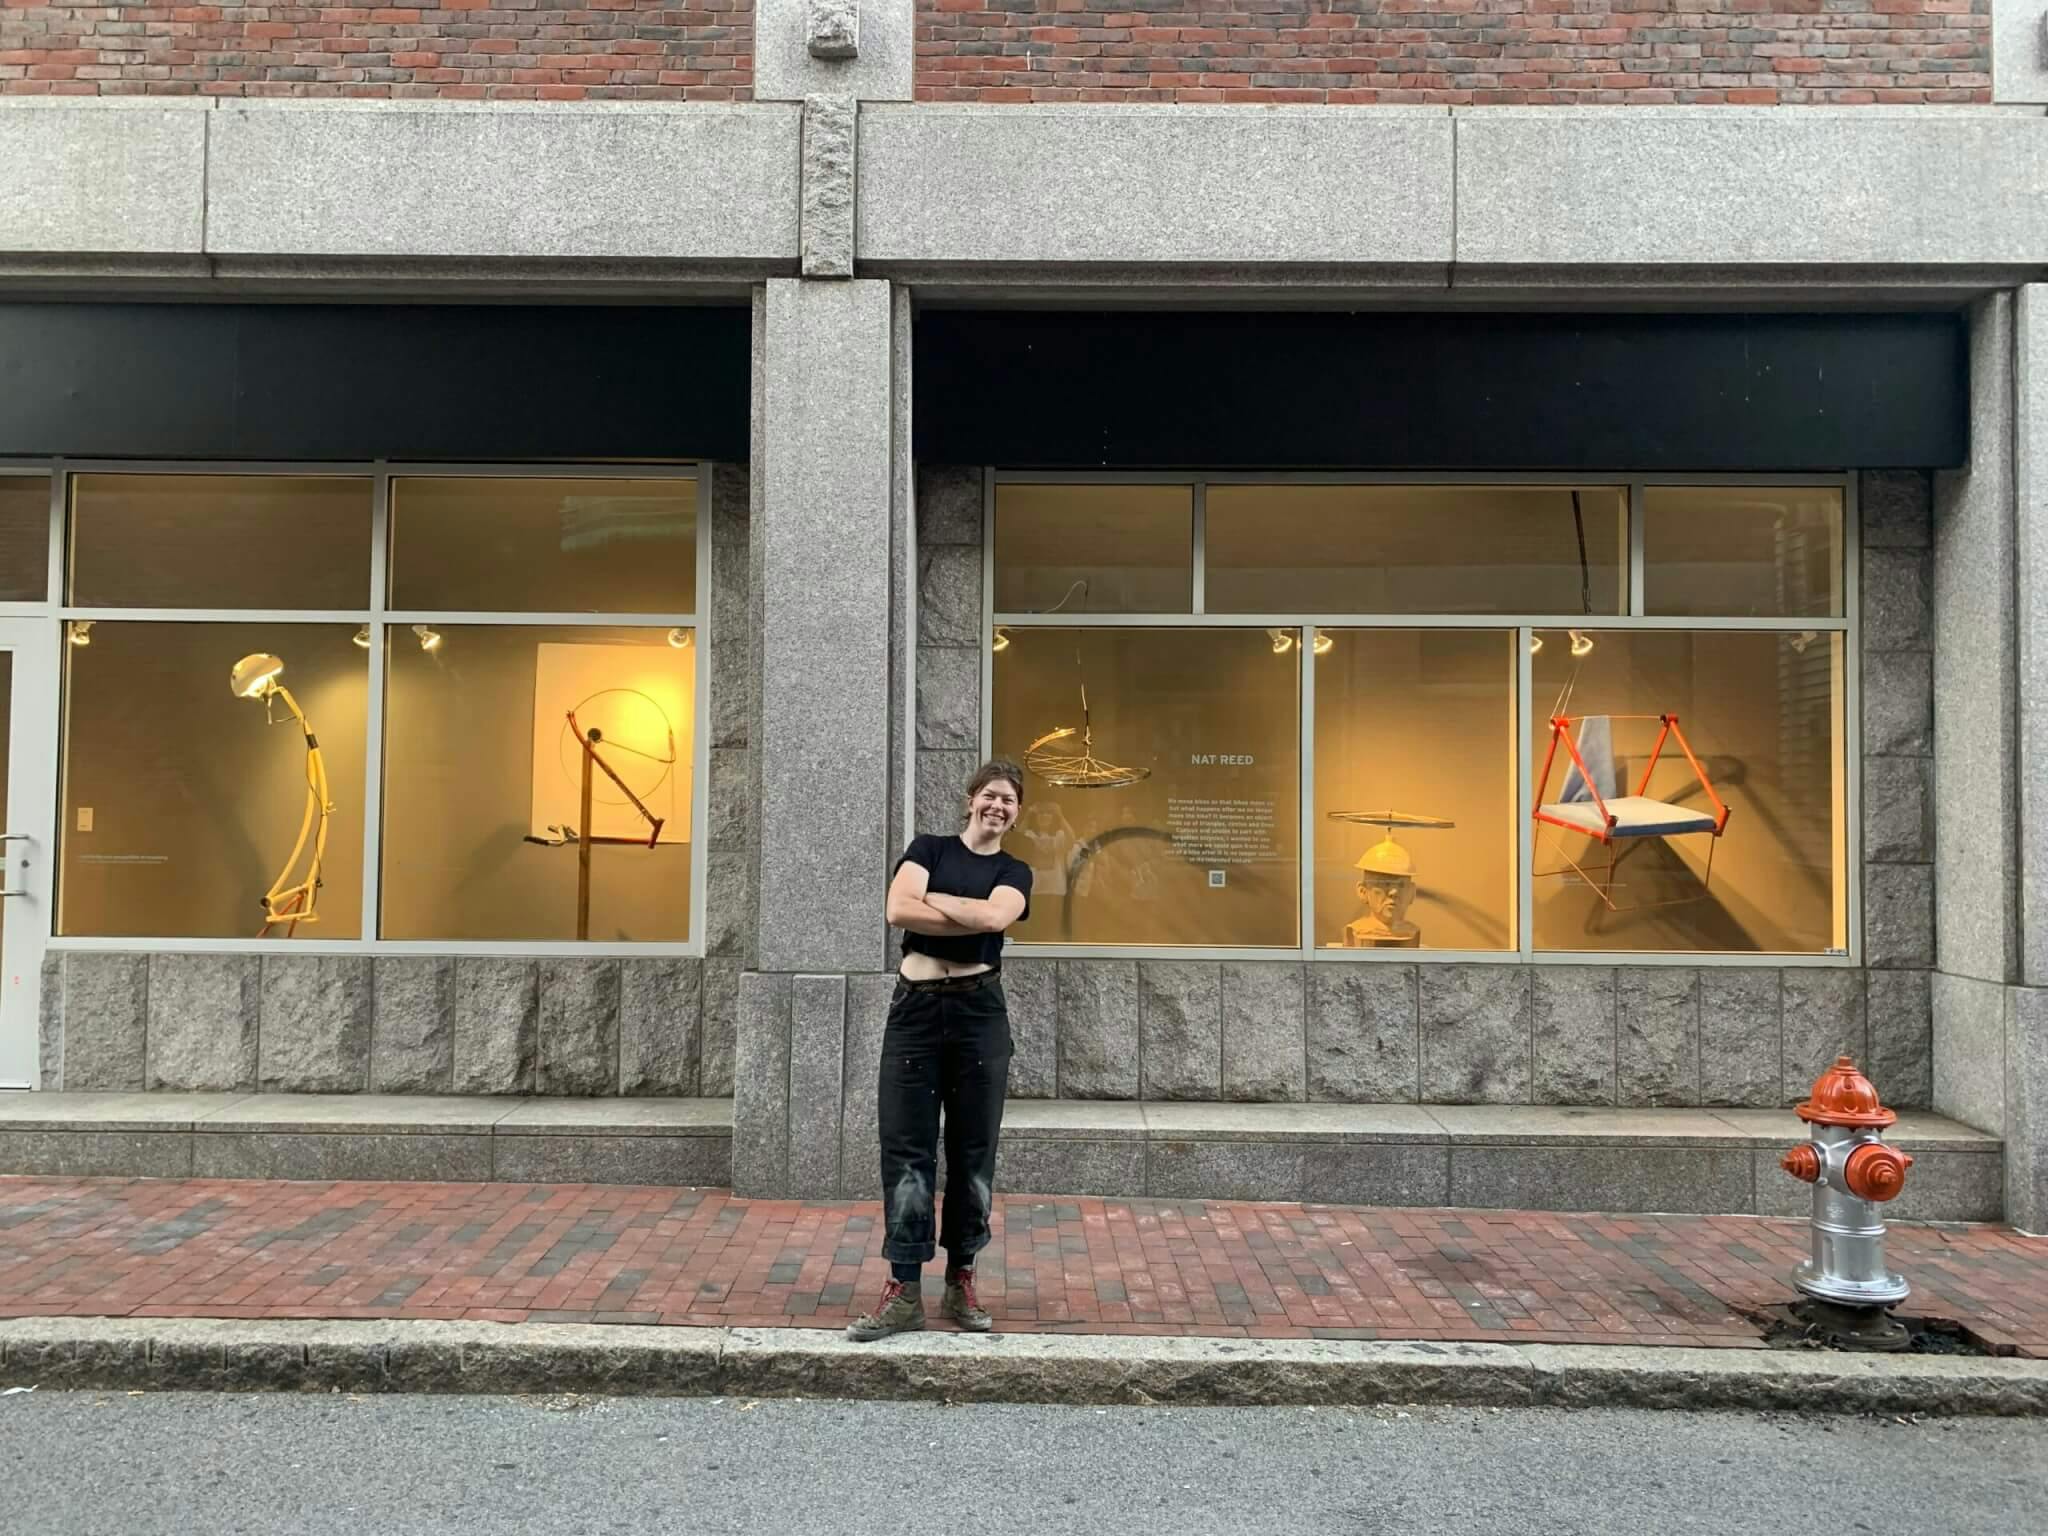 Image of artist Nat Reed in front of "Bikes Move Us" installation